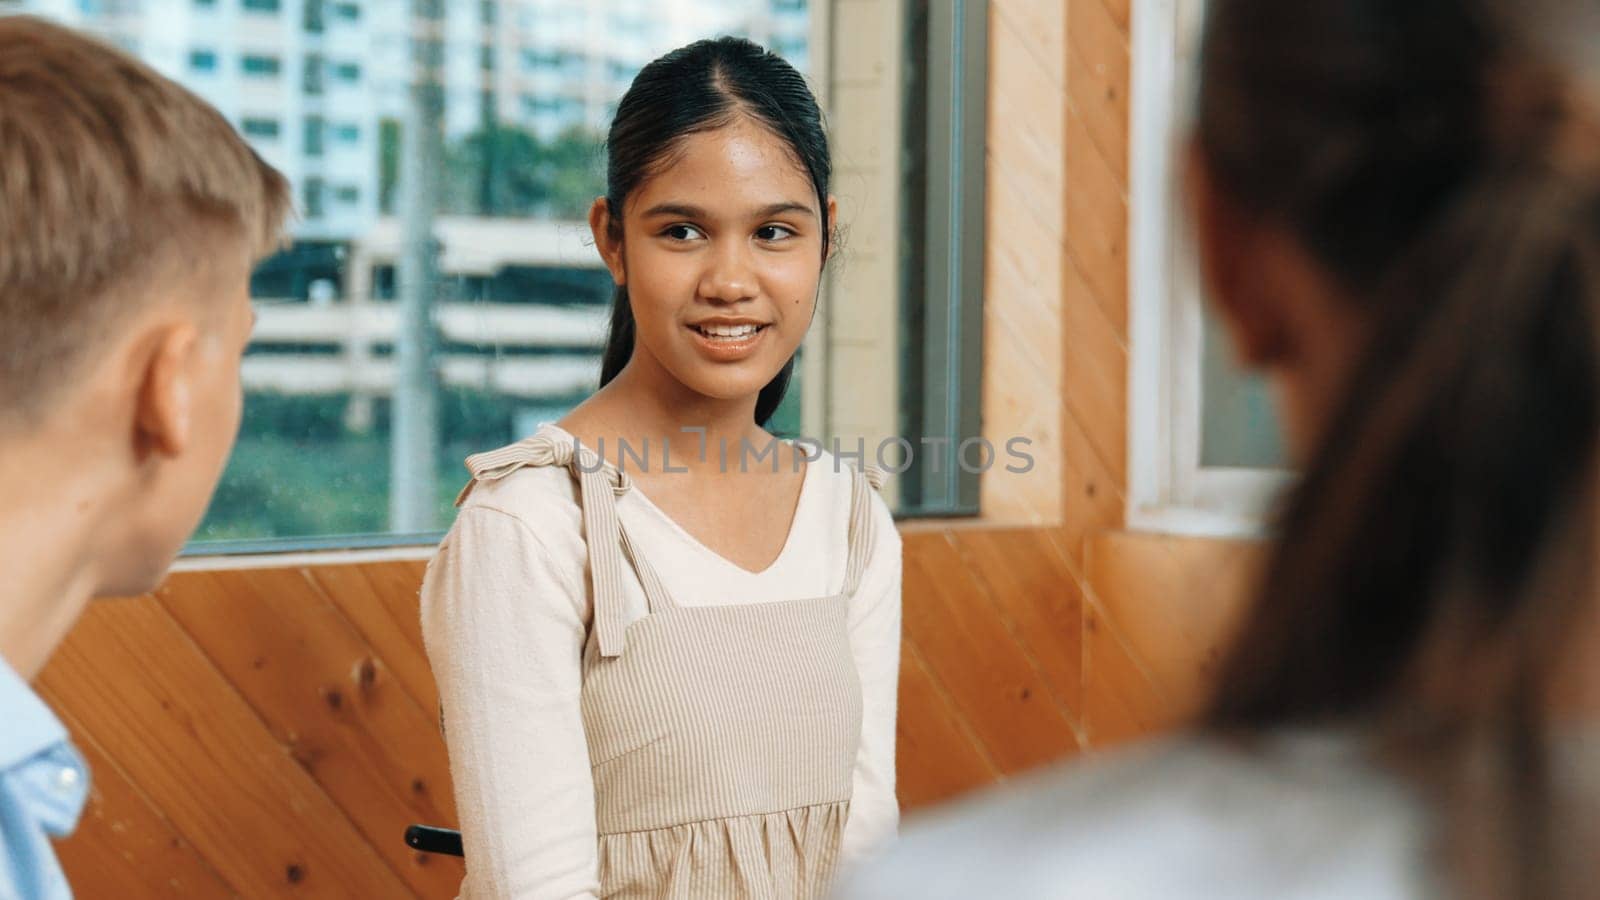 Young student smiling while listening other student in meeting or group discussion. Cute teenager talking about her experience and sharing to friends in mixed races. Creative education. Edification.